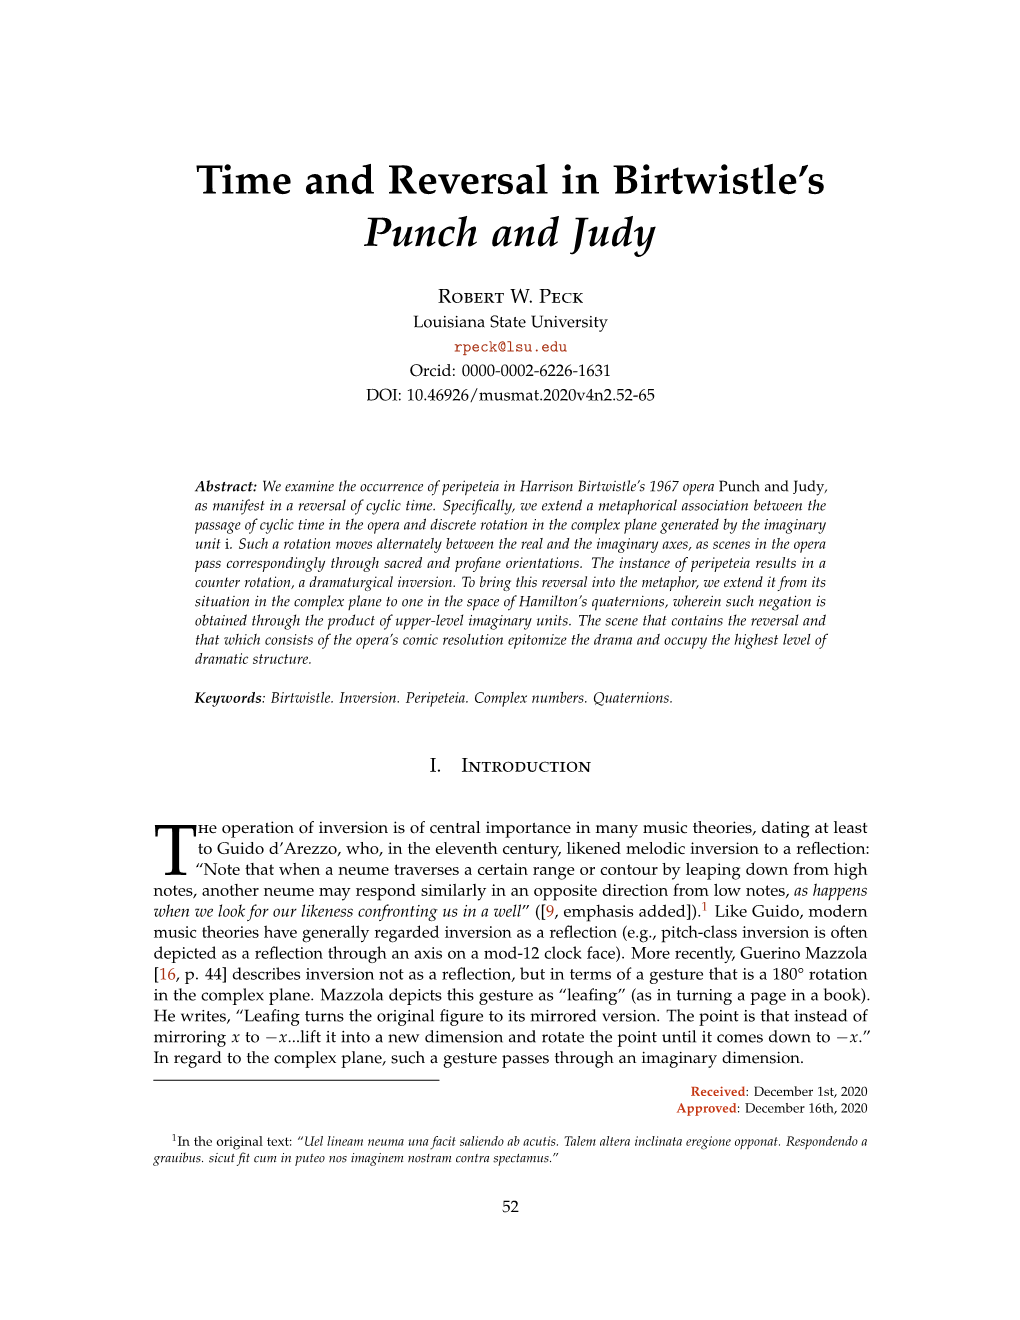 Time and Reversal in Birtwistle's Punch and Judy